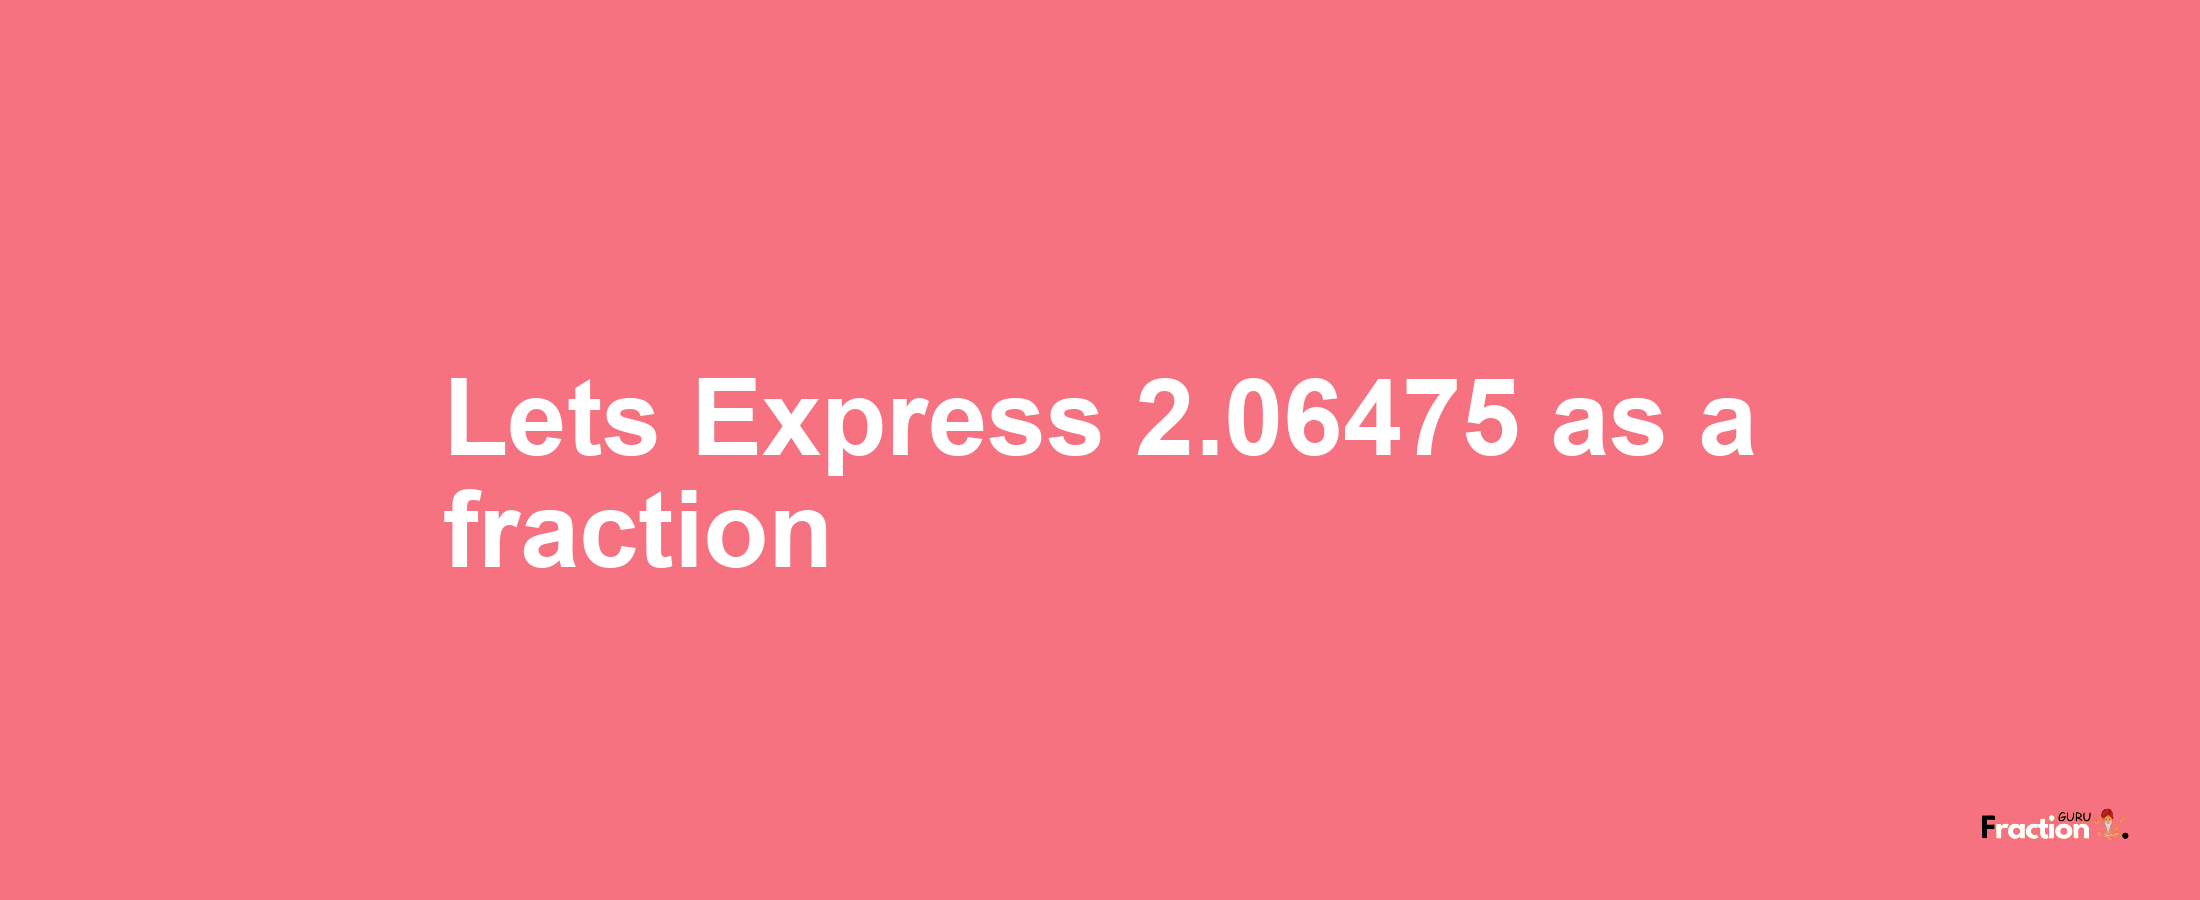 Lets Express 2.06475 as afraction